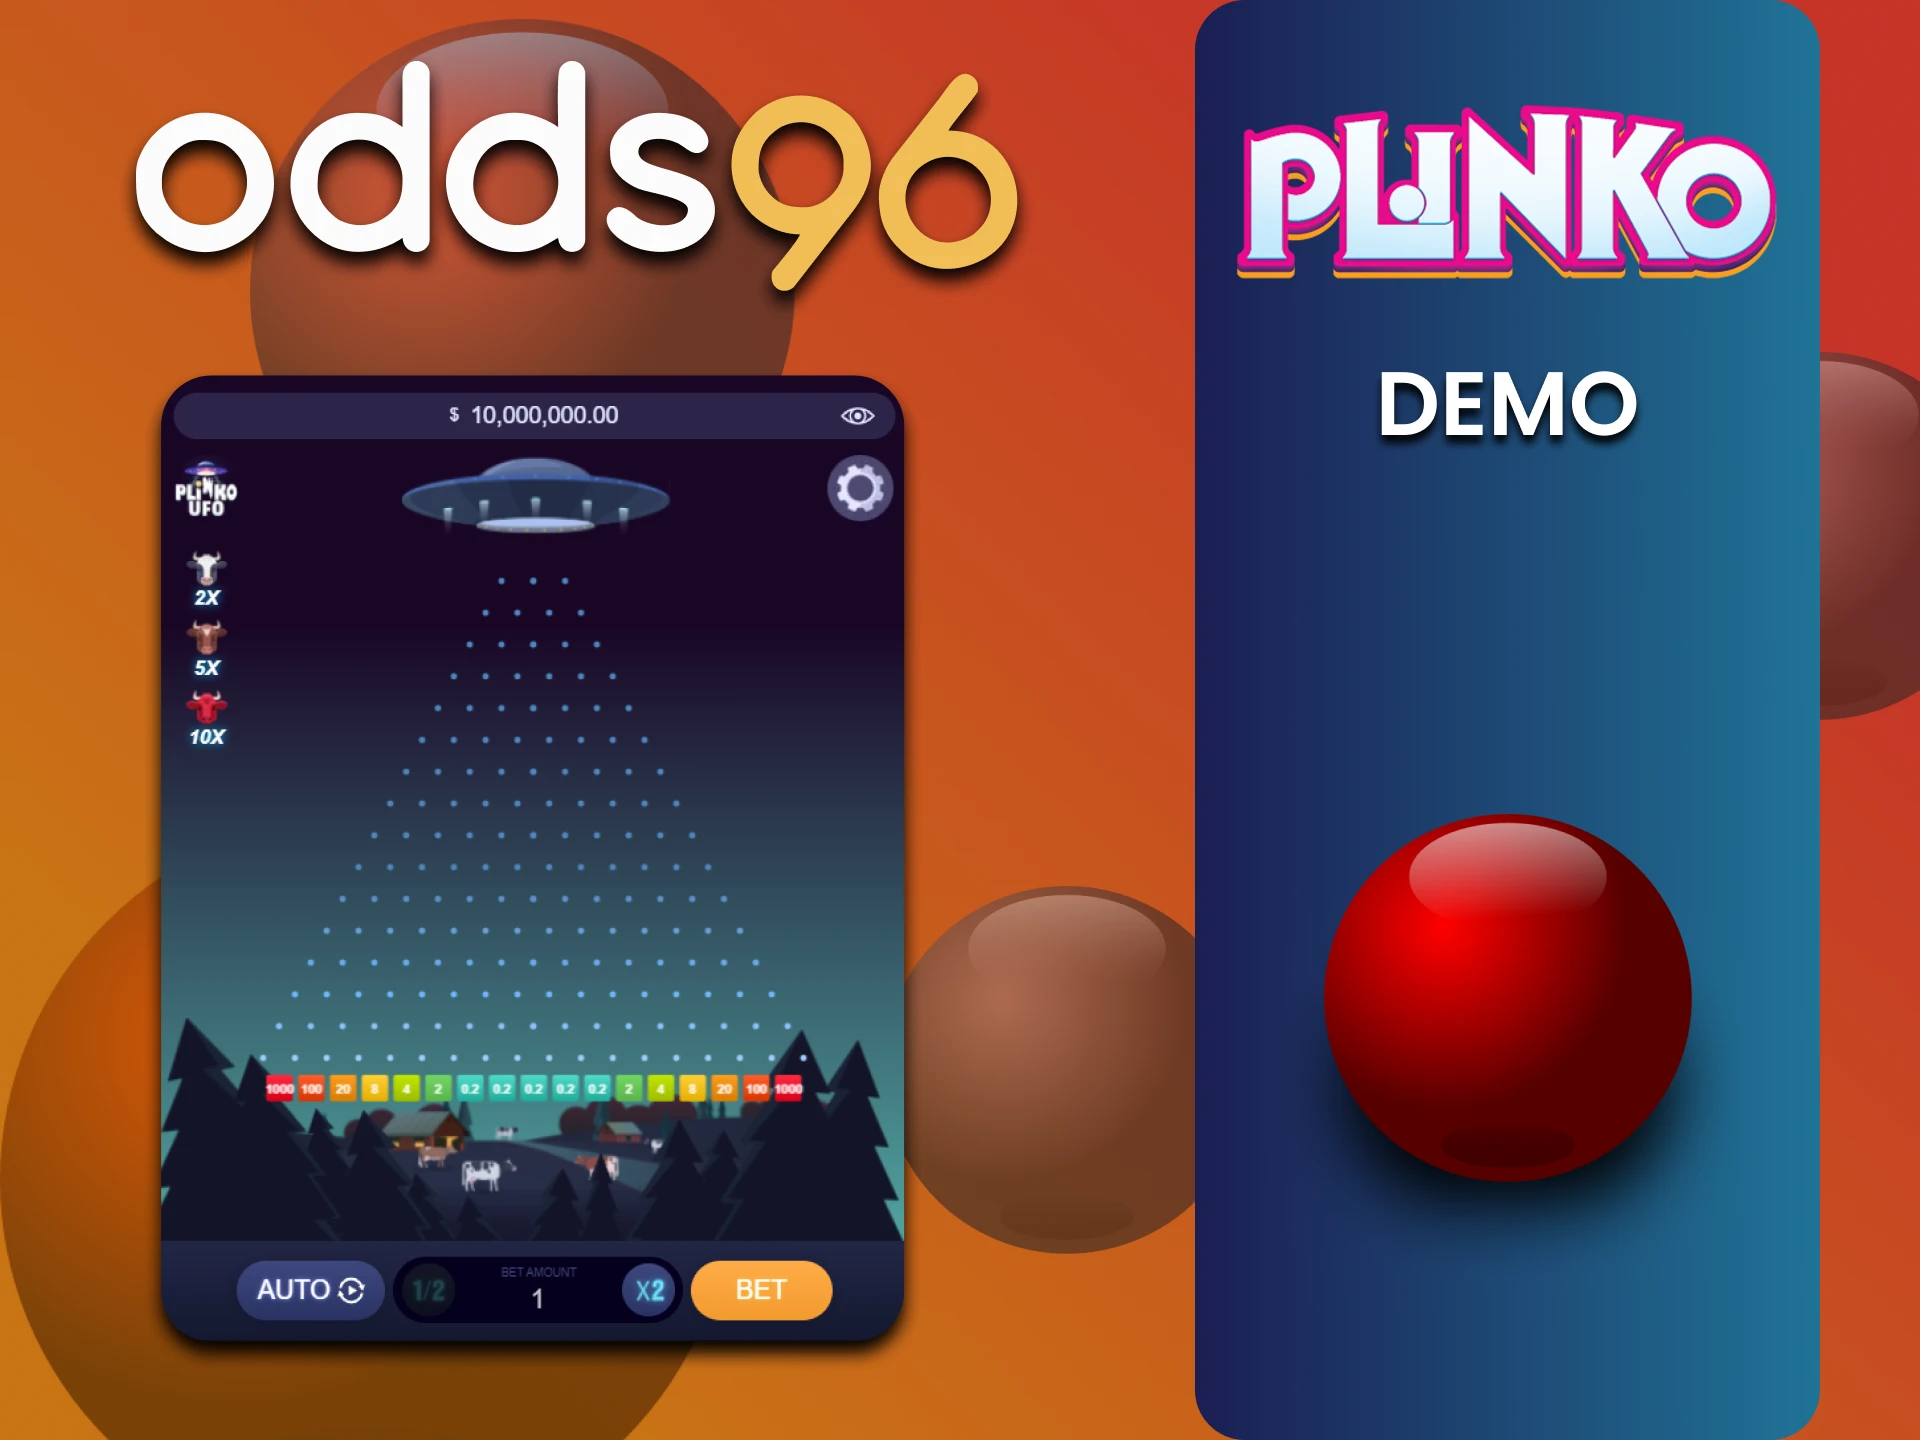 Train in the demo version of the Plinko game on odds96.